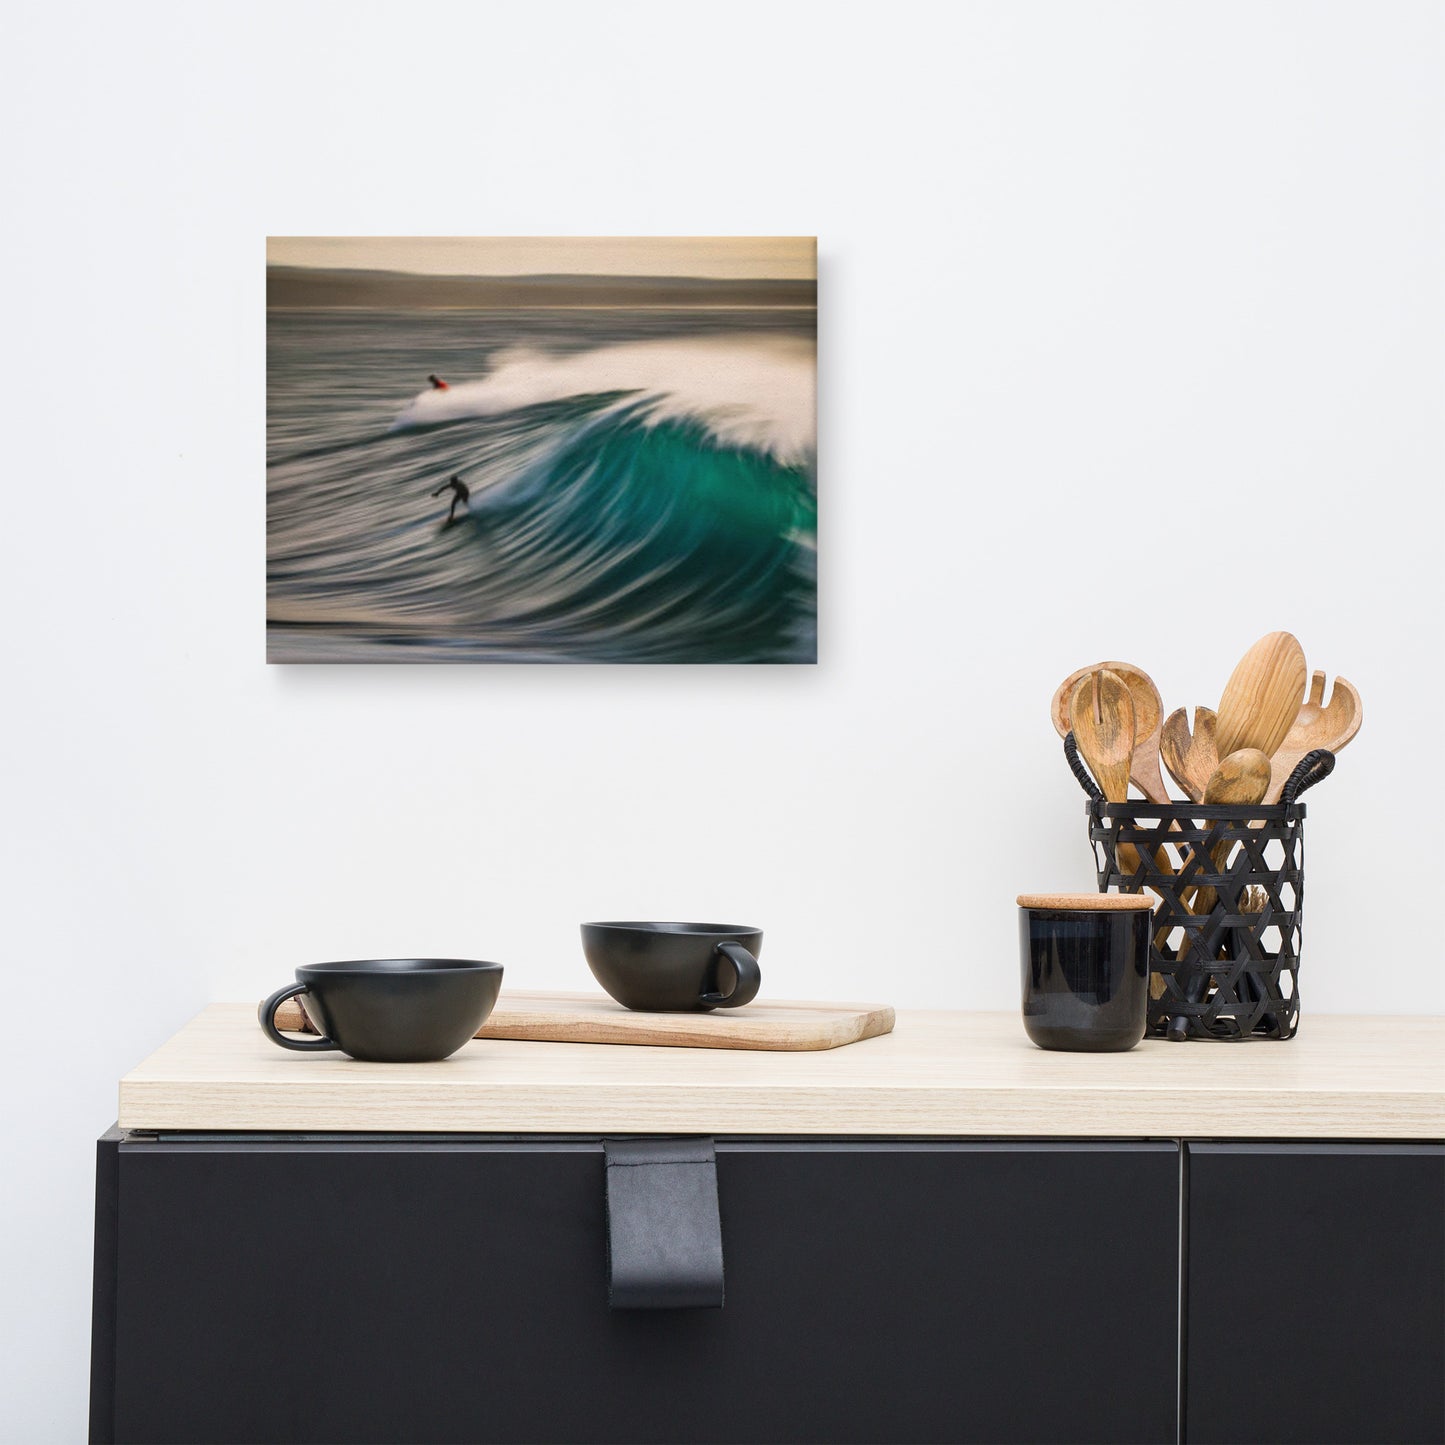 A Surfer's Dance with Light Lifestyle / Abstract / Landscape Photograph Canvas Wall Art Print